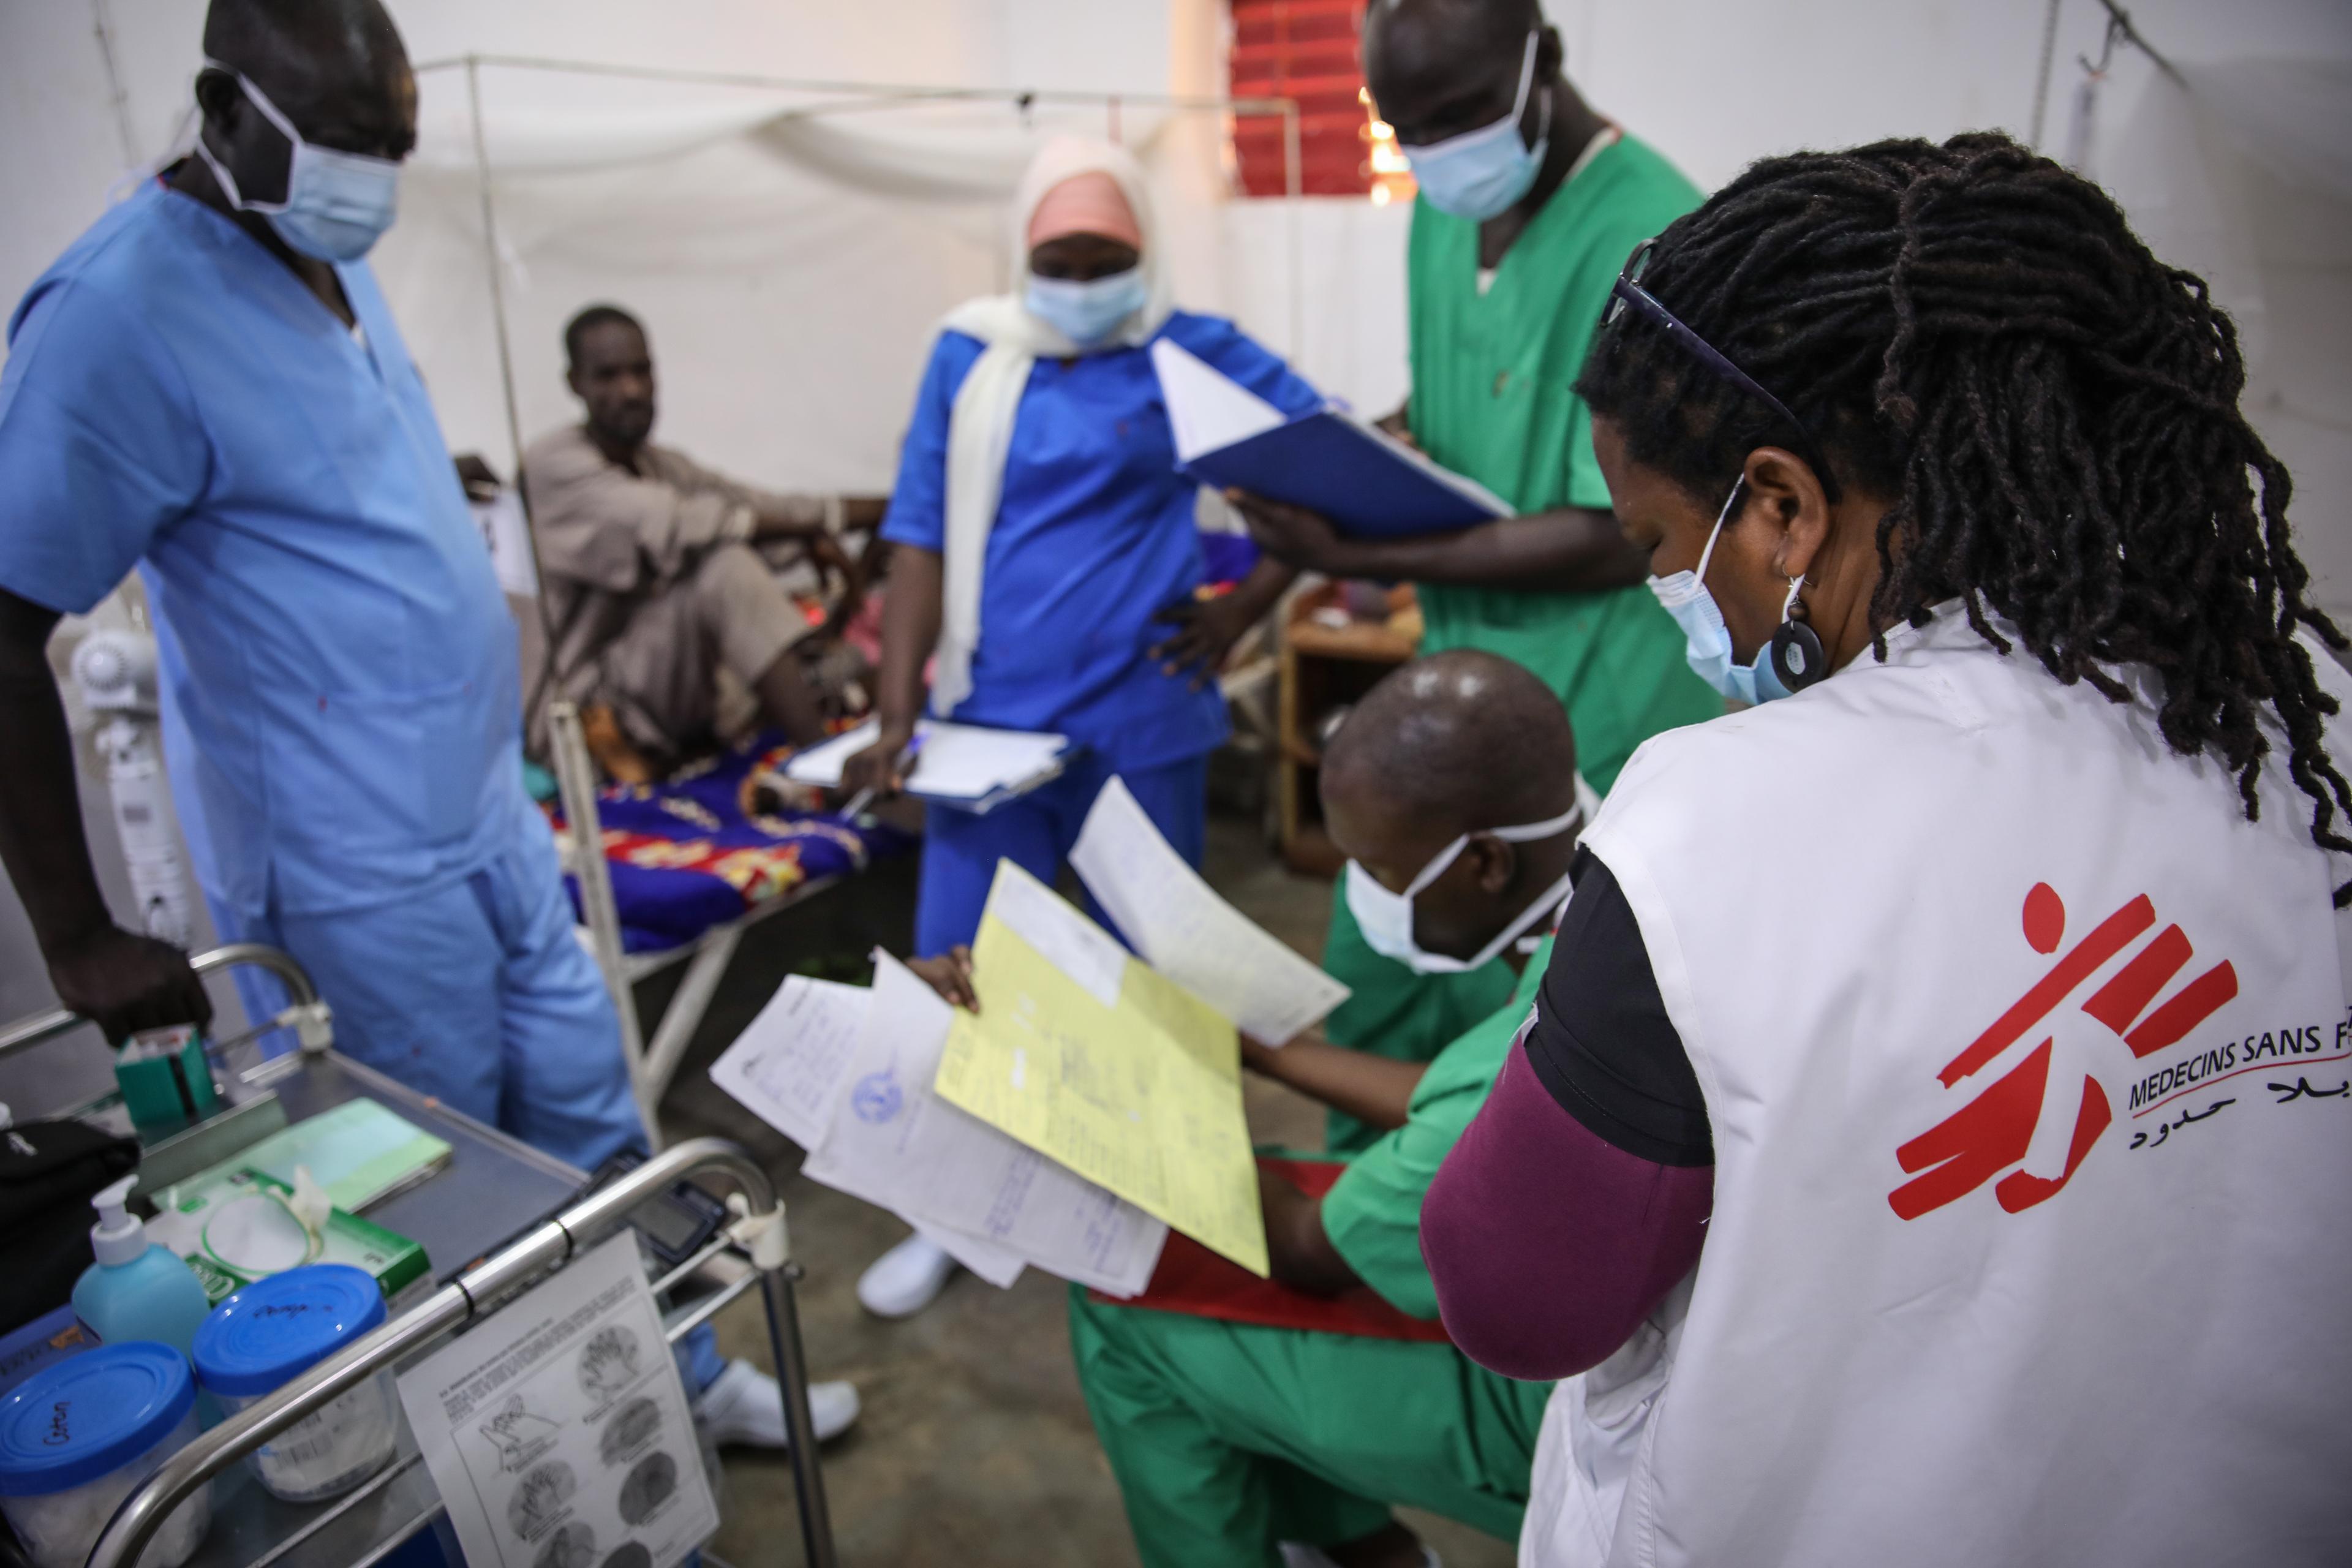 MSF teams treat children suffering from severe acute malnutrition in Adre hospital, eastern Chad. 